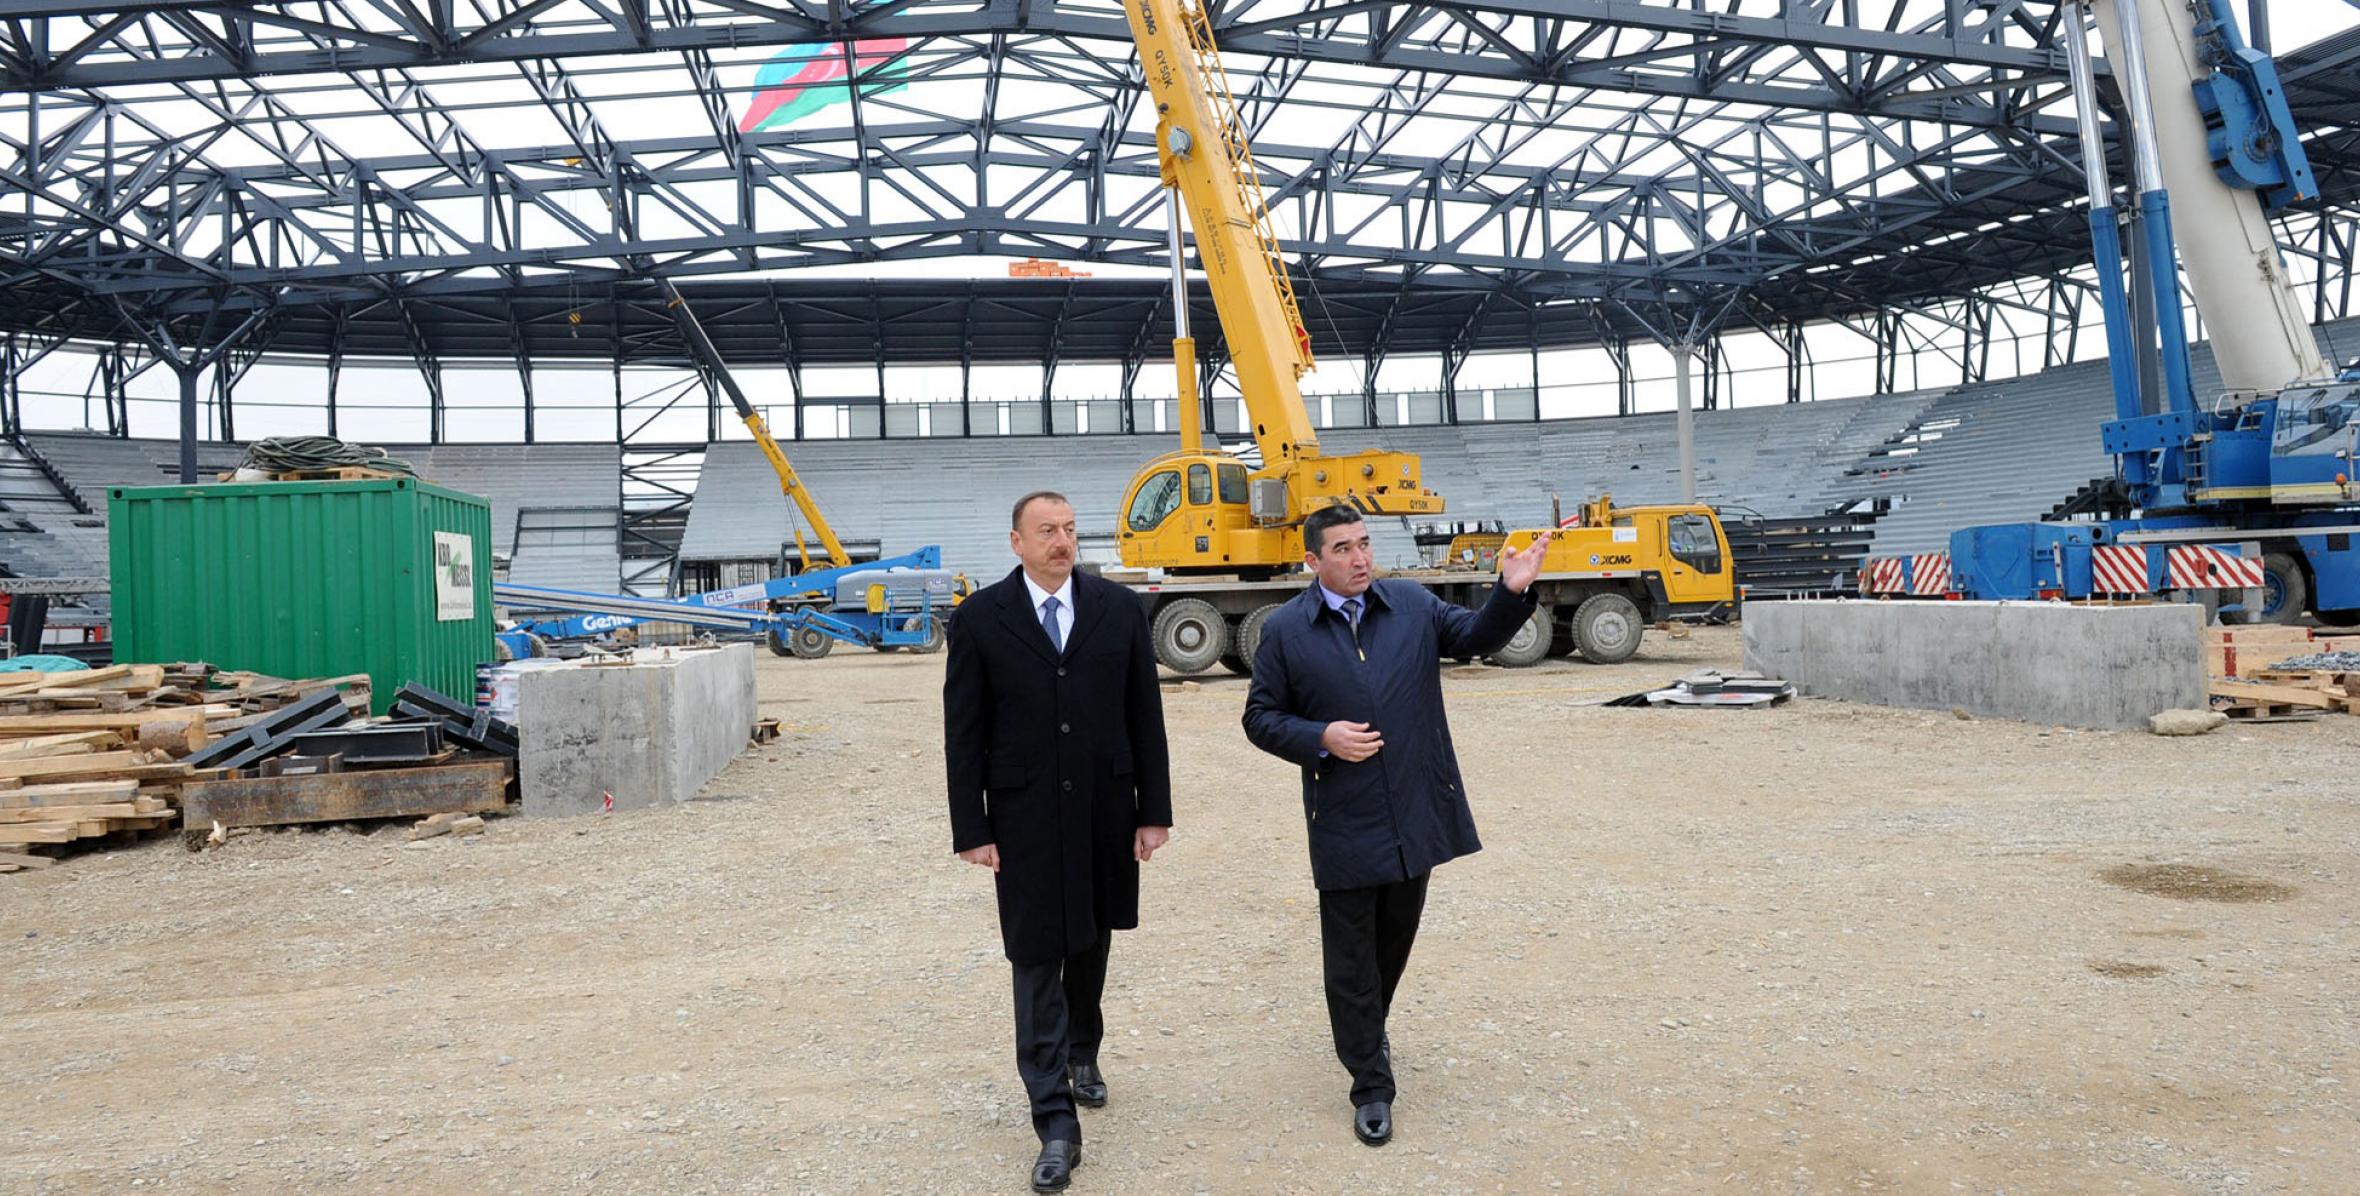 Ilham Aliyev reviewed work under way in and around the State Flag Square